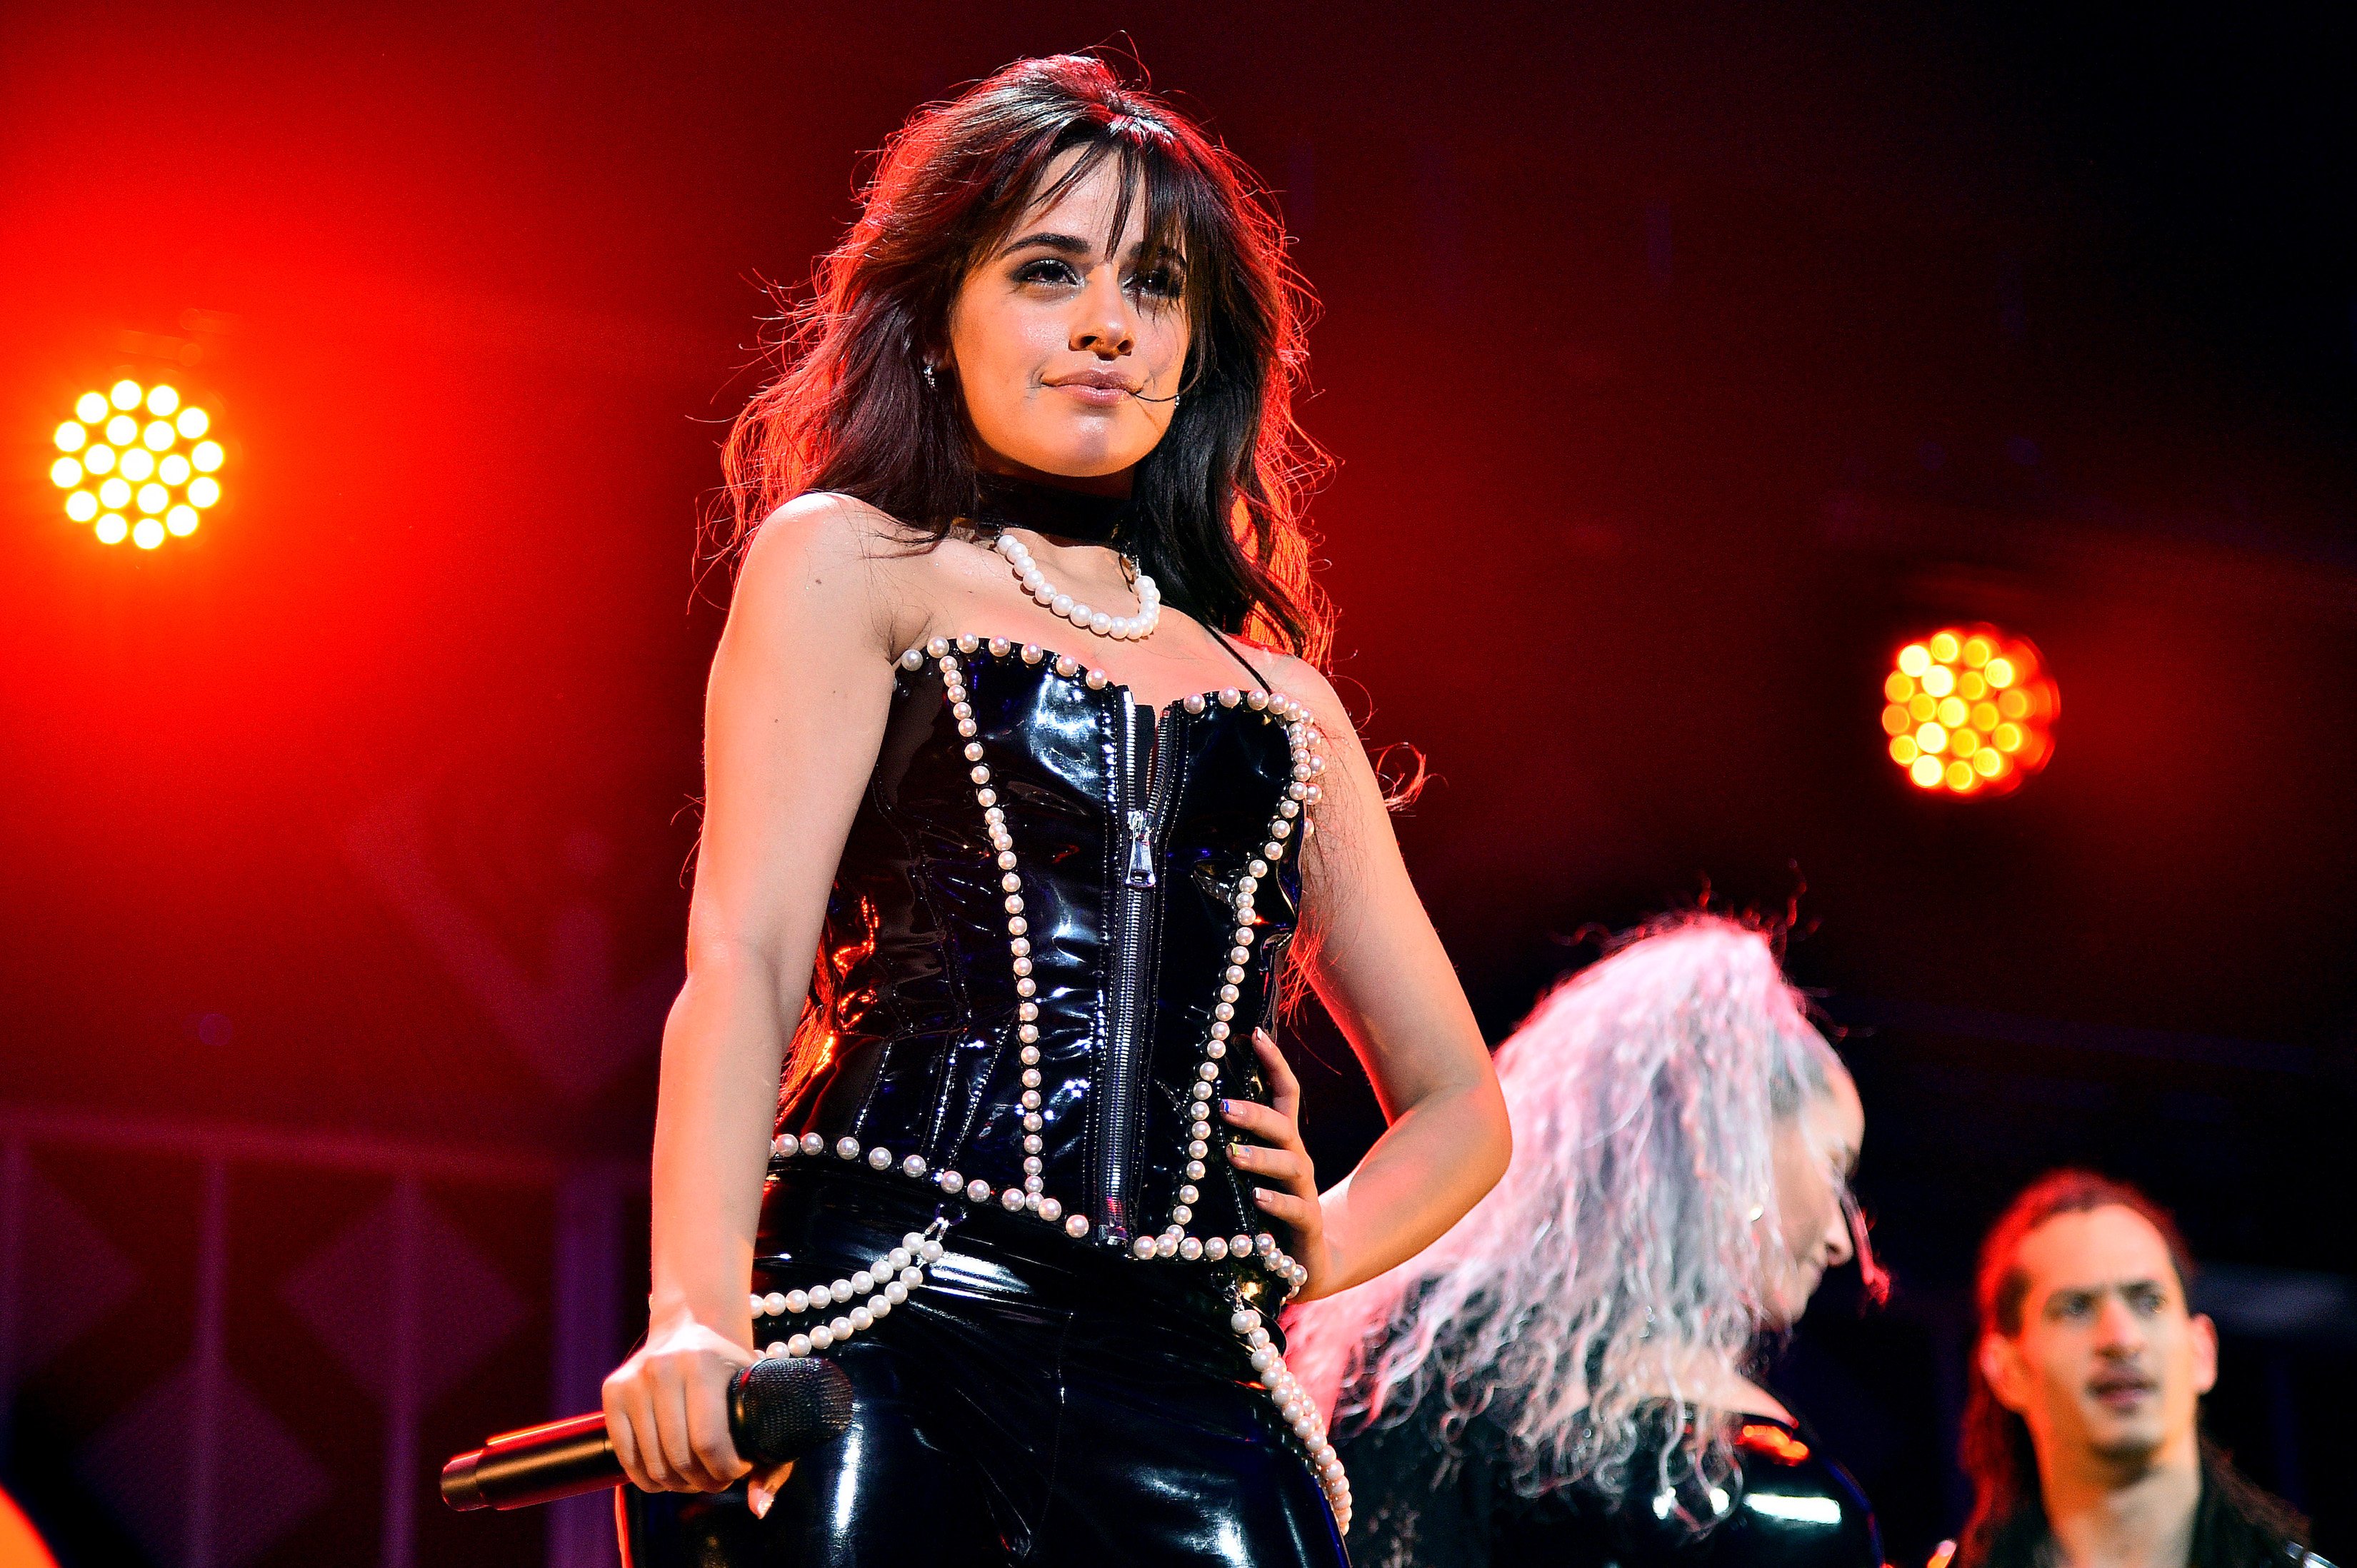 Camila Cabello performing onstage during iHeartRadio's Z100 Jingle Ball 2019